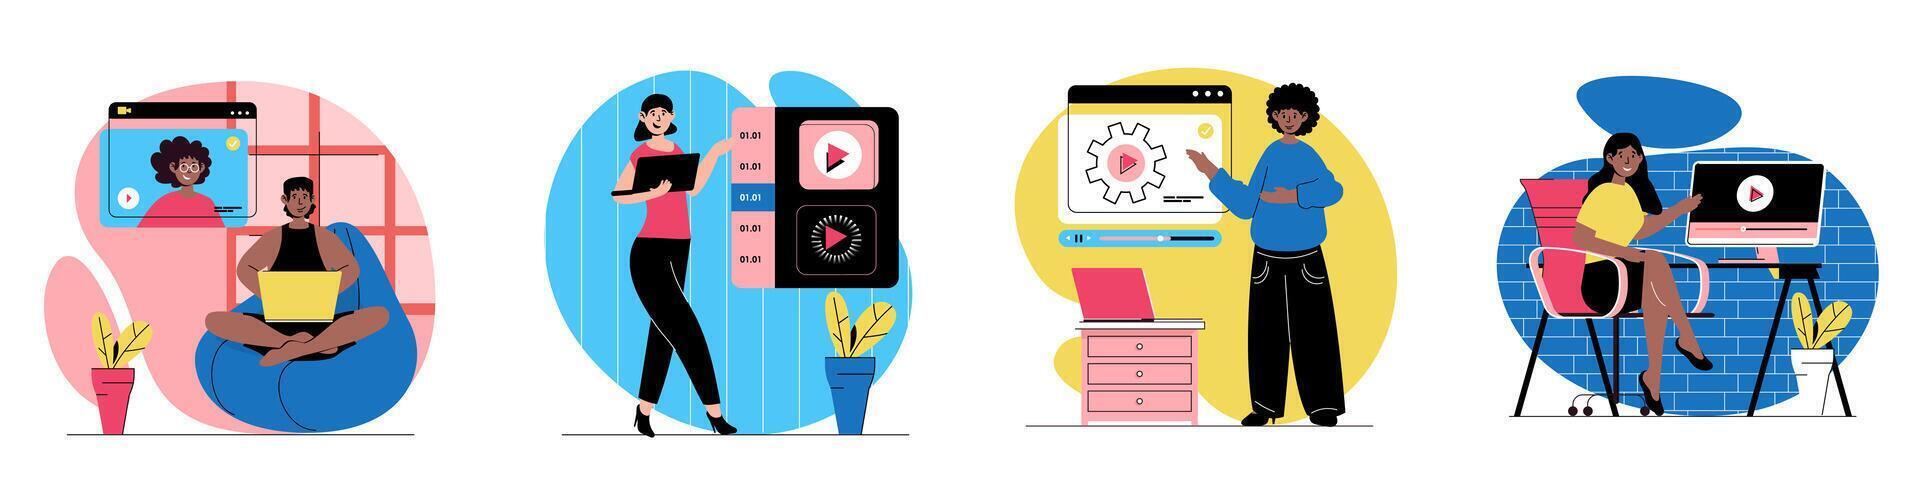 Video tutorial concept with people scenes set in flat web design. Bundle of character situations with men and women watching online tutorials, getting knowledge at webinars. Vector illustrations.